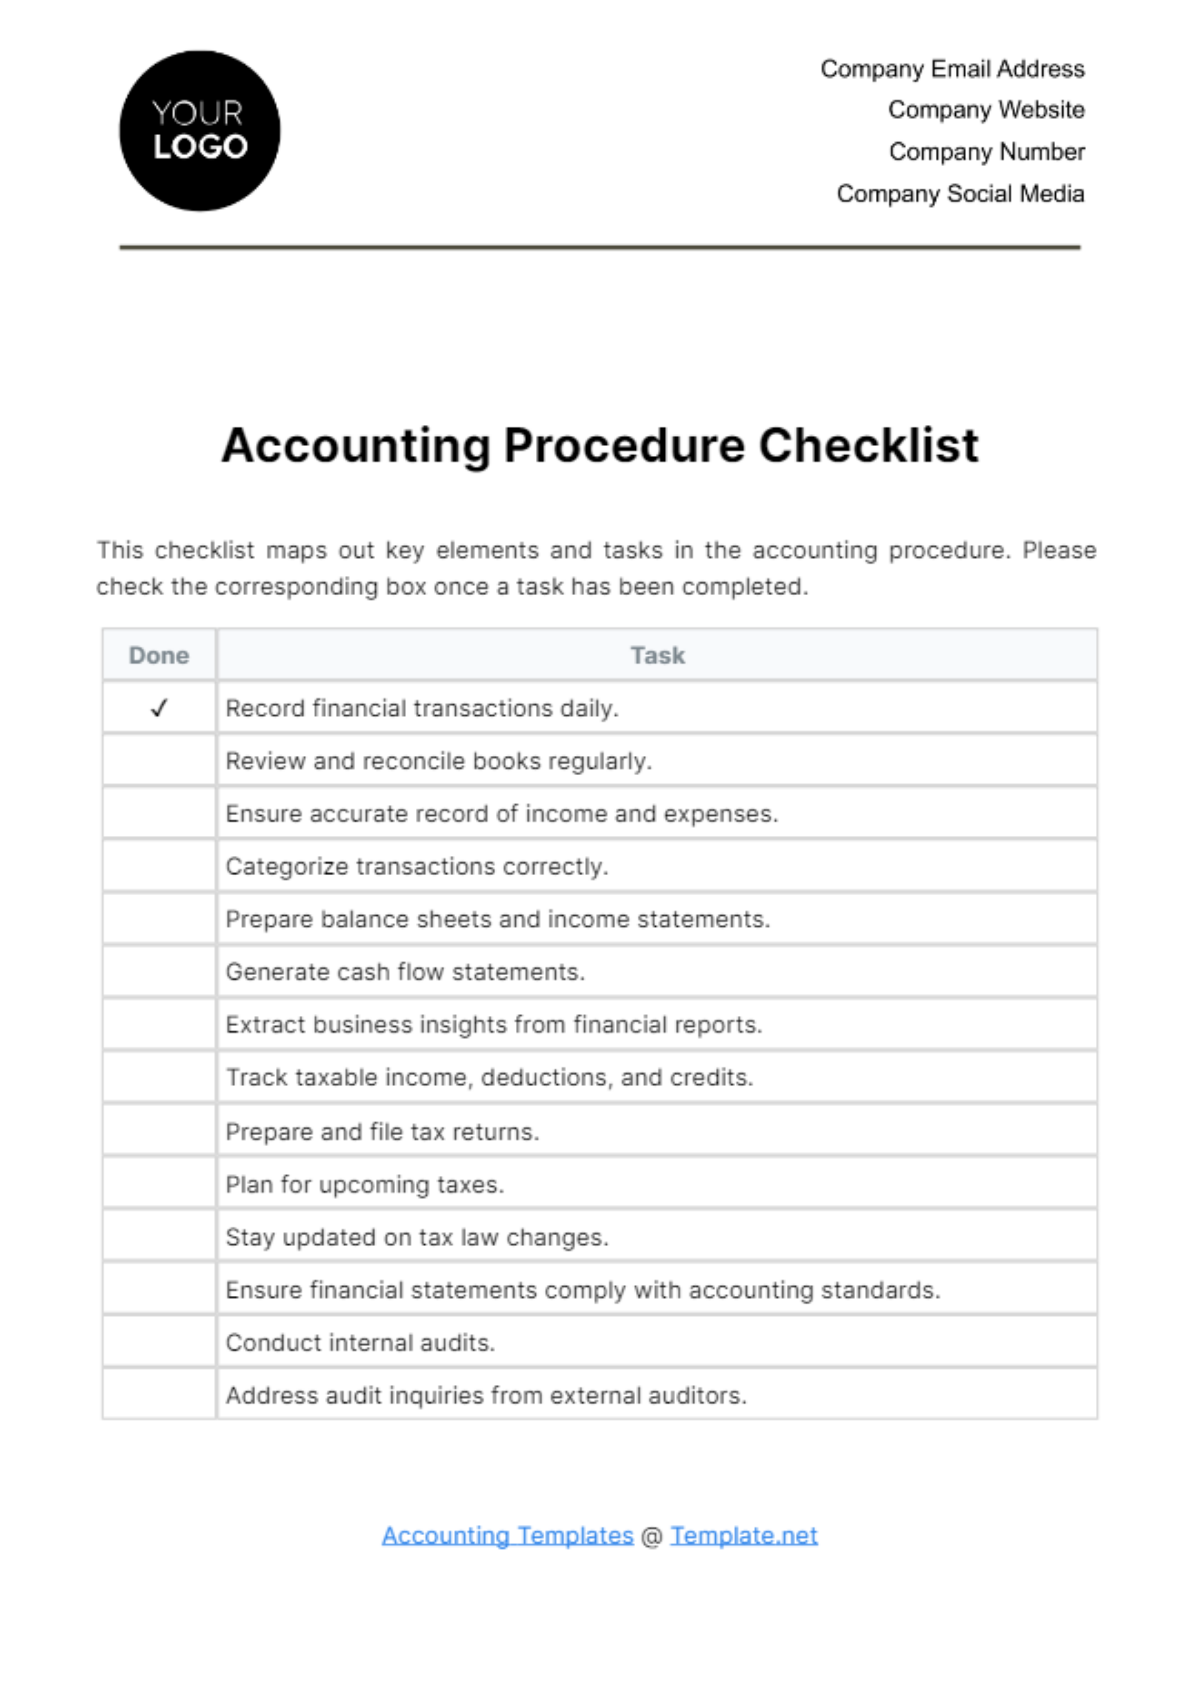 Free Accounting Procedure Checklist Template